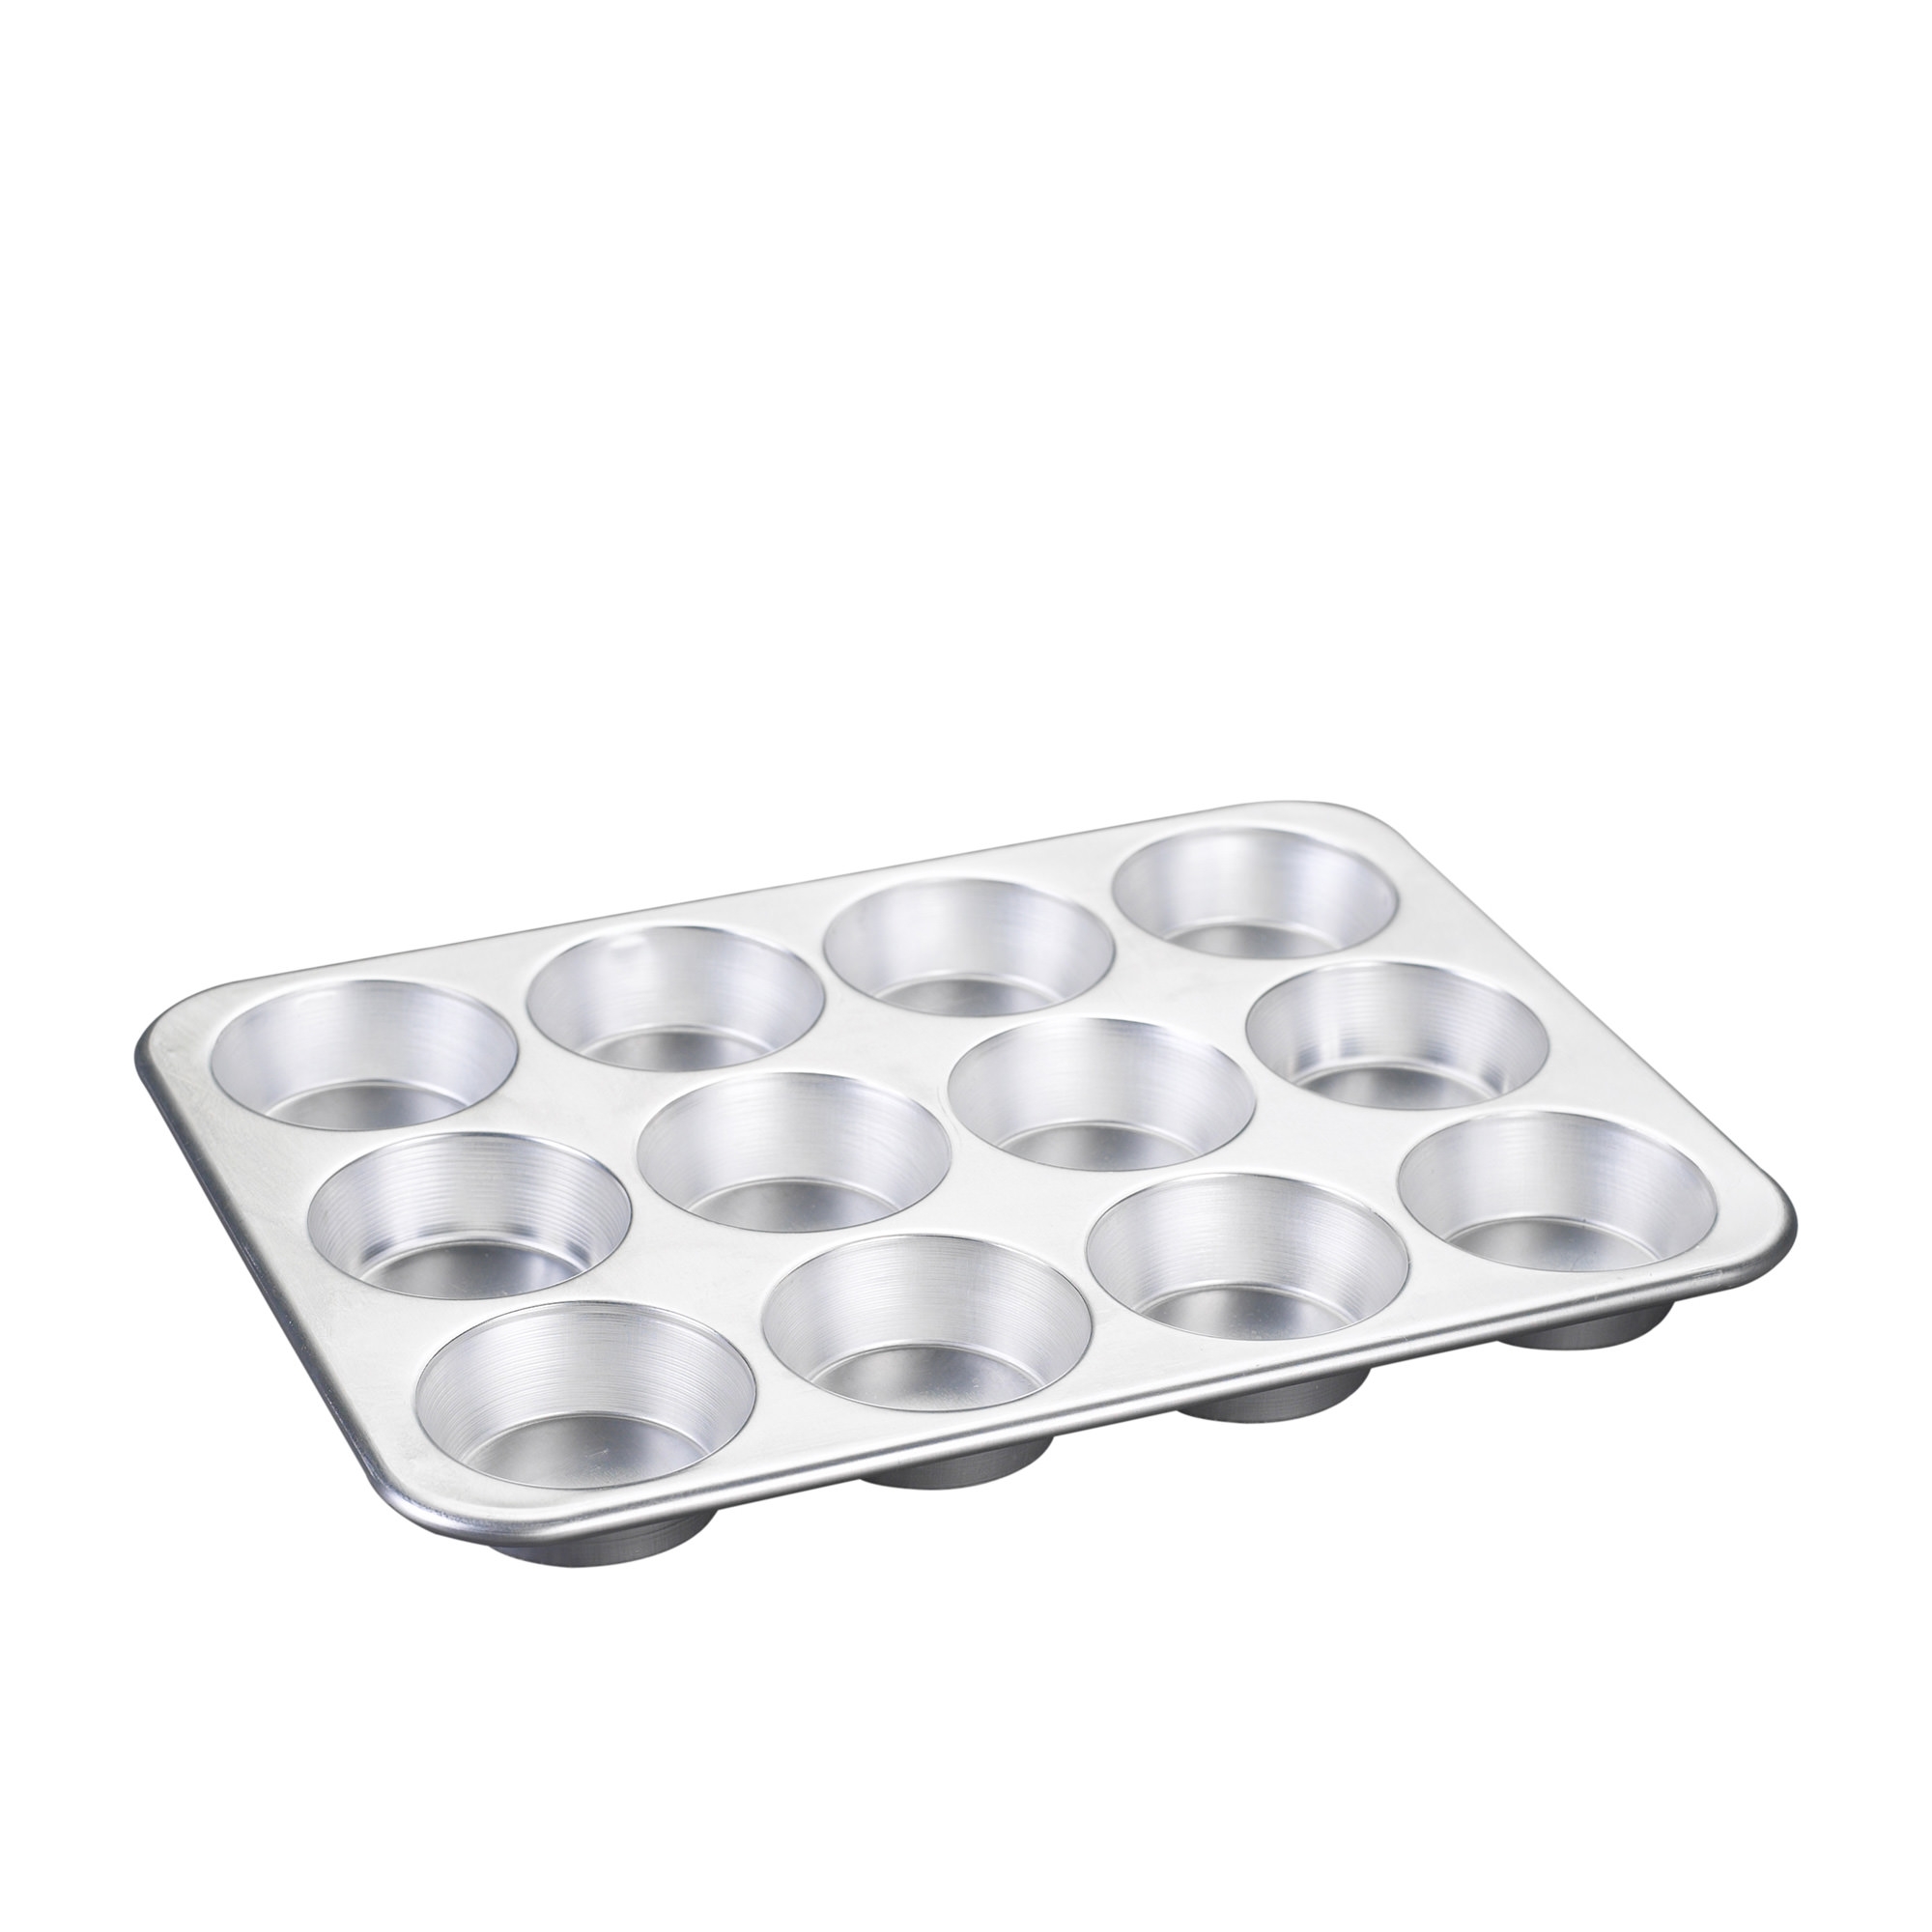 Nordic Ware Naturals Muffin Pan 12 Cup Image 1